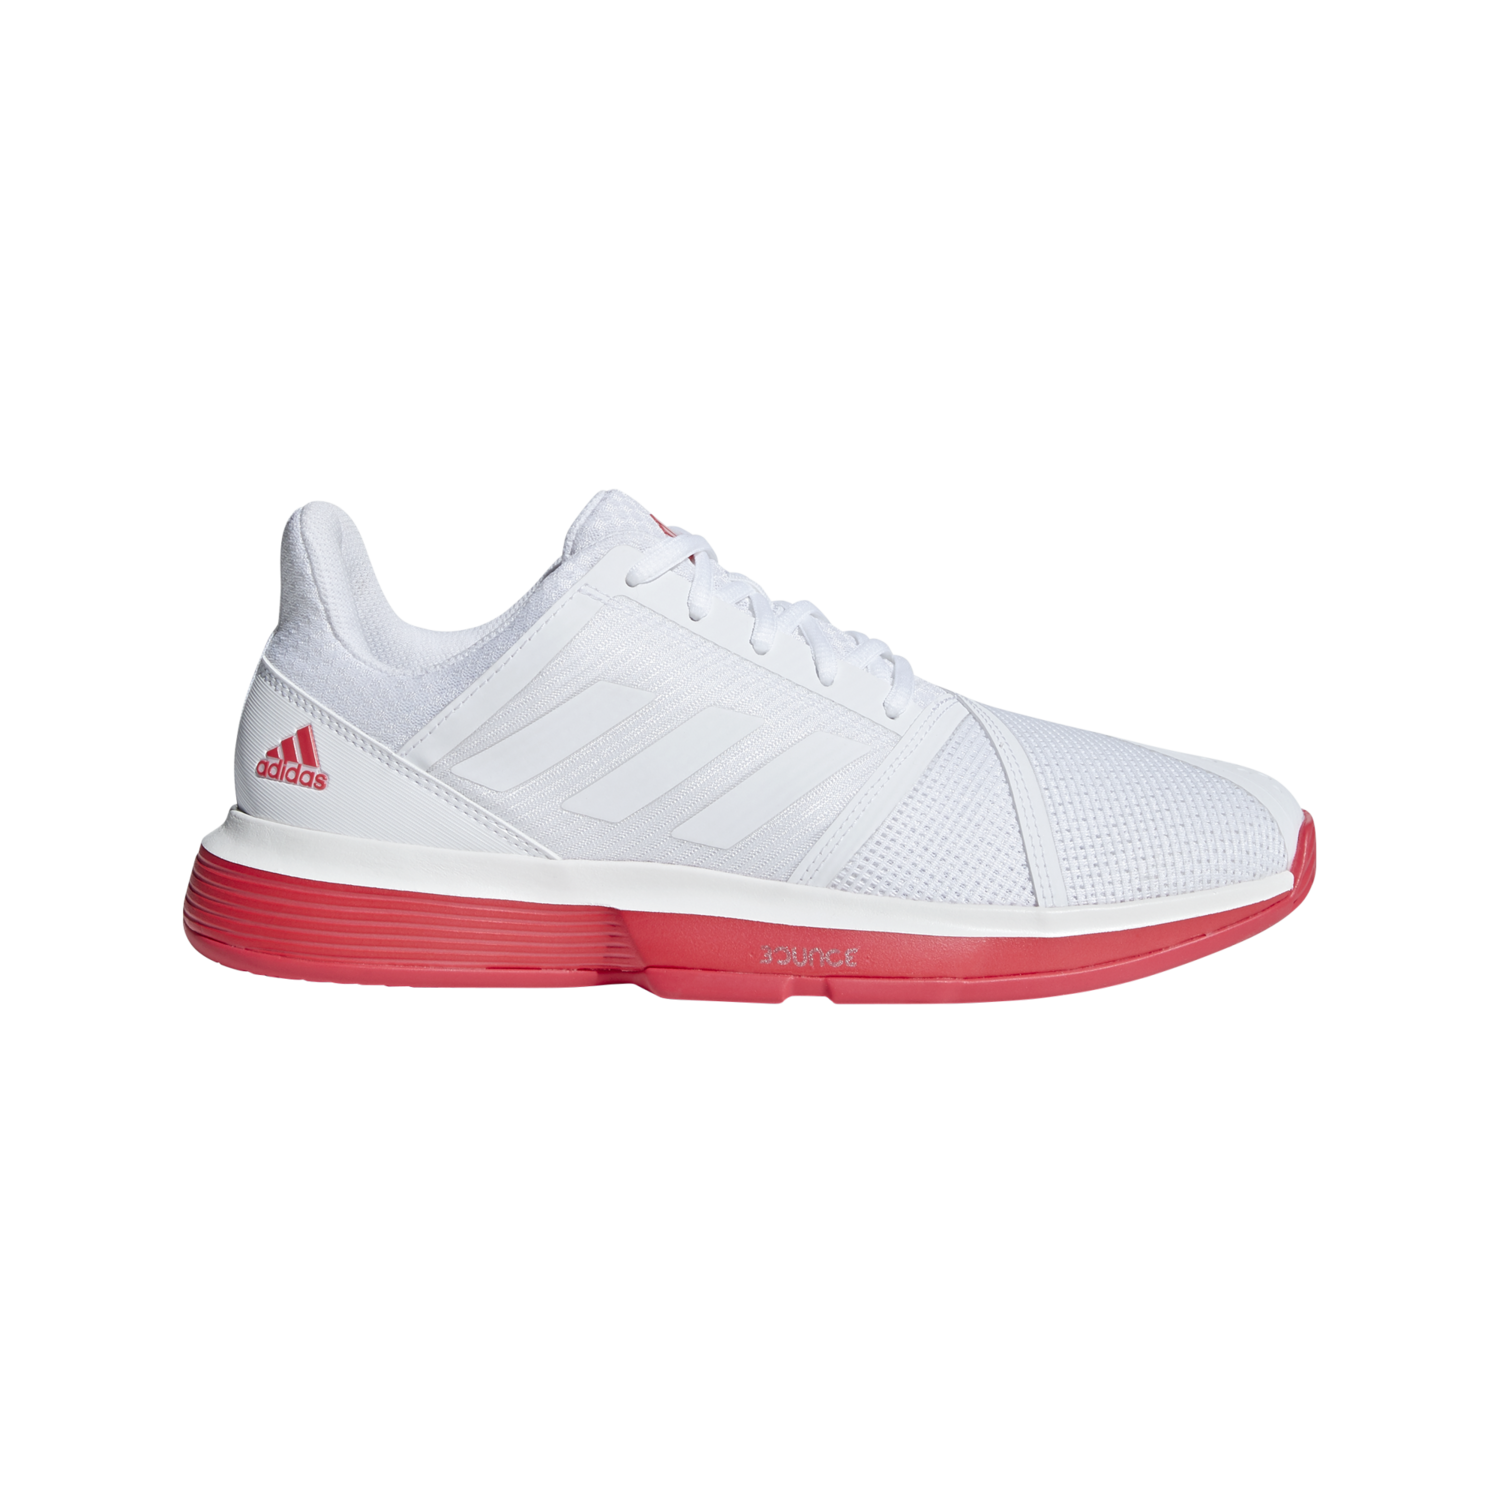 adidas CourtJam Bounce Men's Tennis Shoe - White/Red